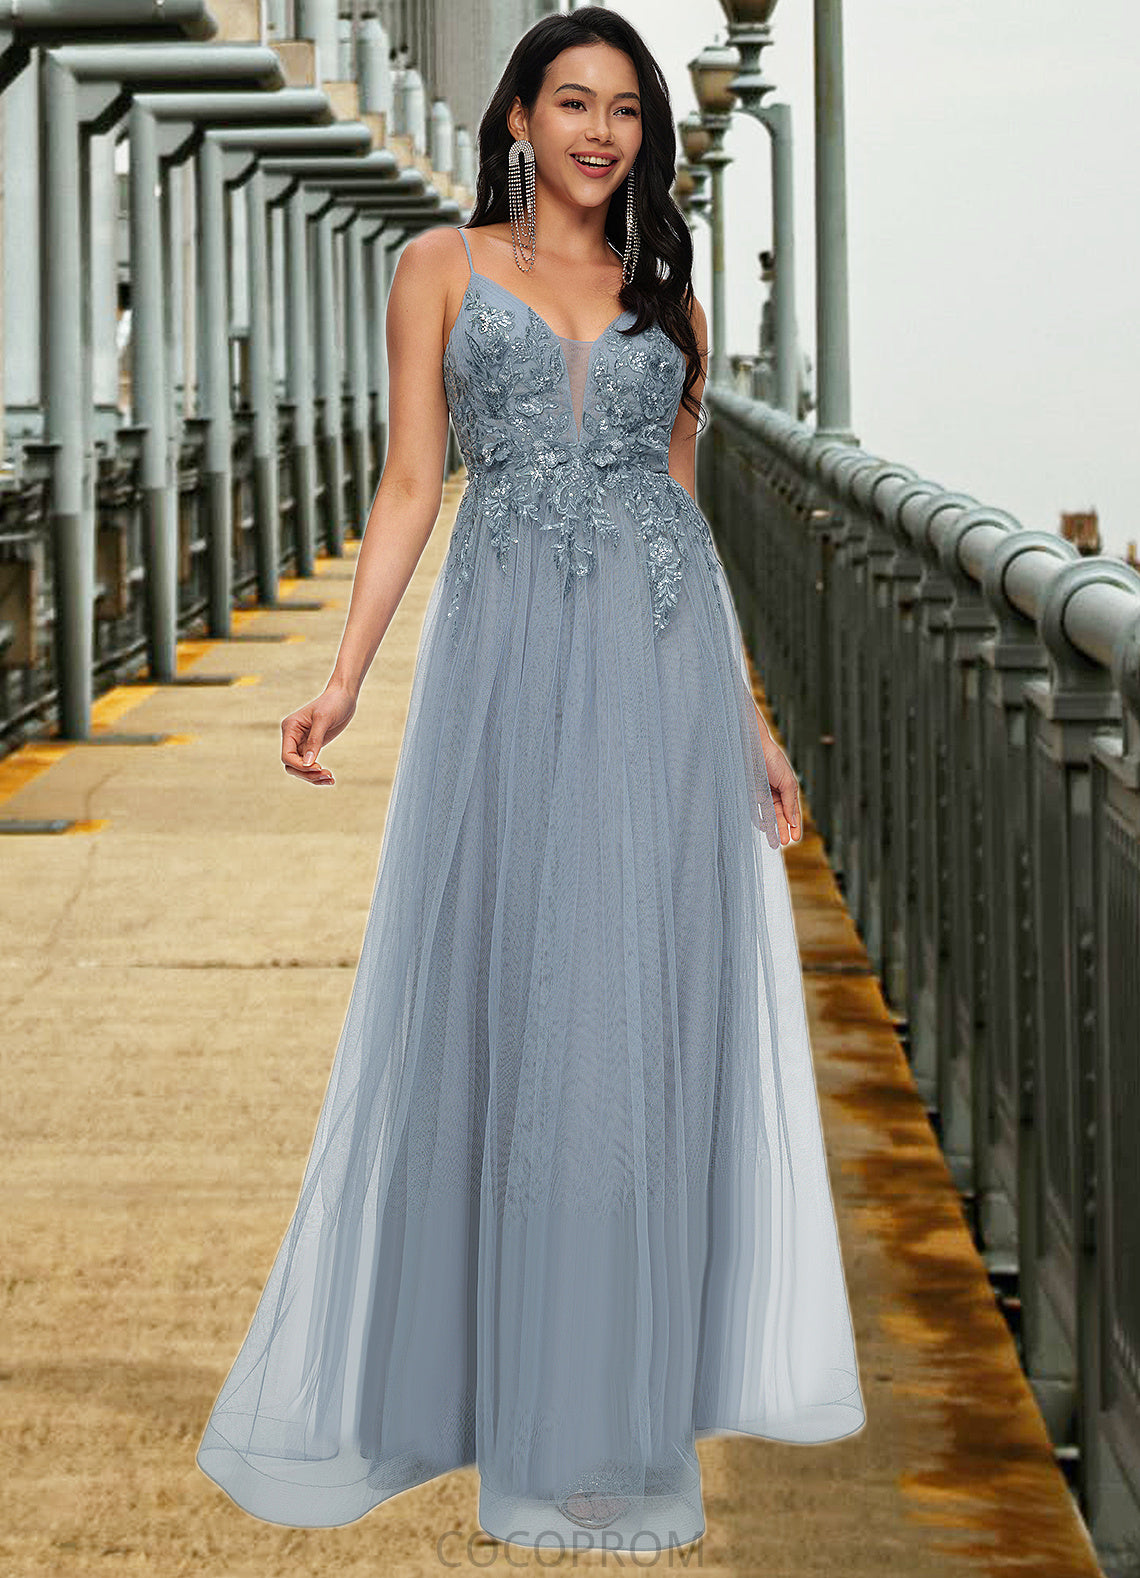 Hadassah A-line V-Neck Floor-Length Tulle Prom Dresses With Appliques Lace Sequins DBP0022223